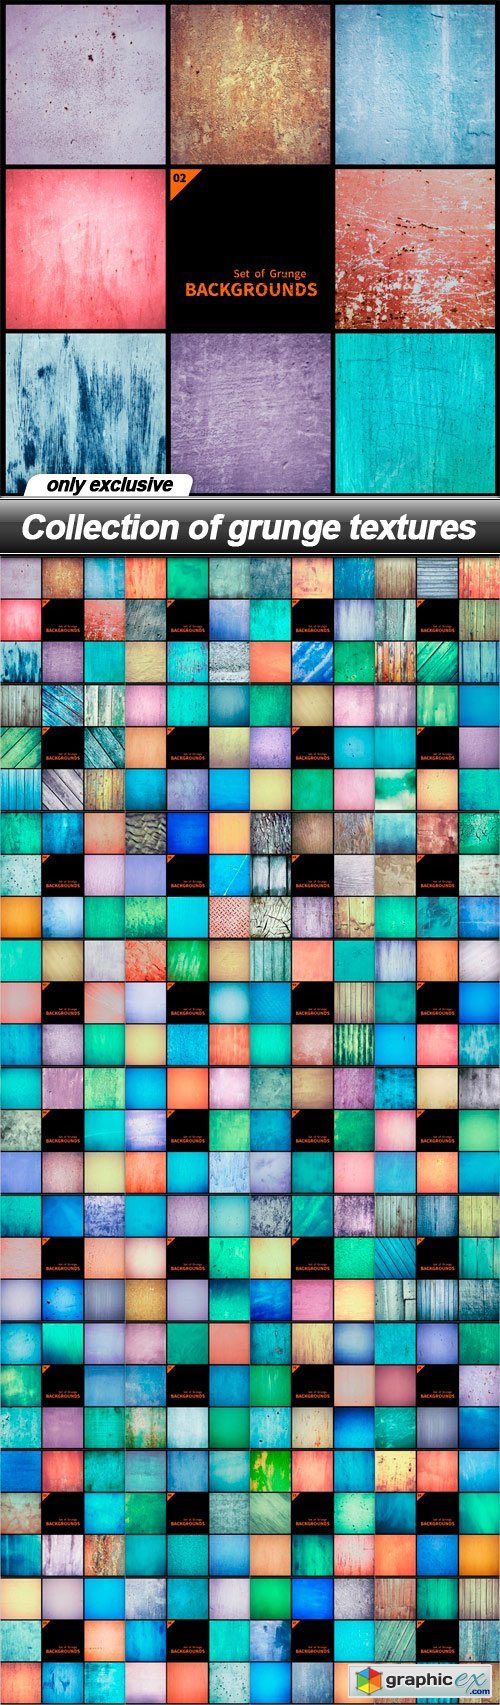 Collection of grunge textures - 36 UHQ JPEG